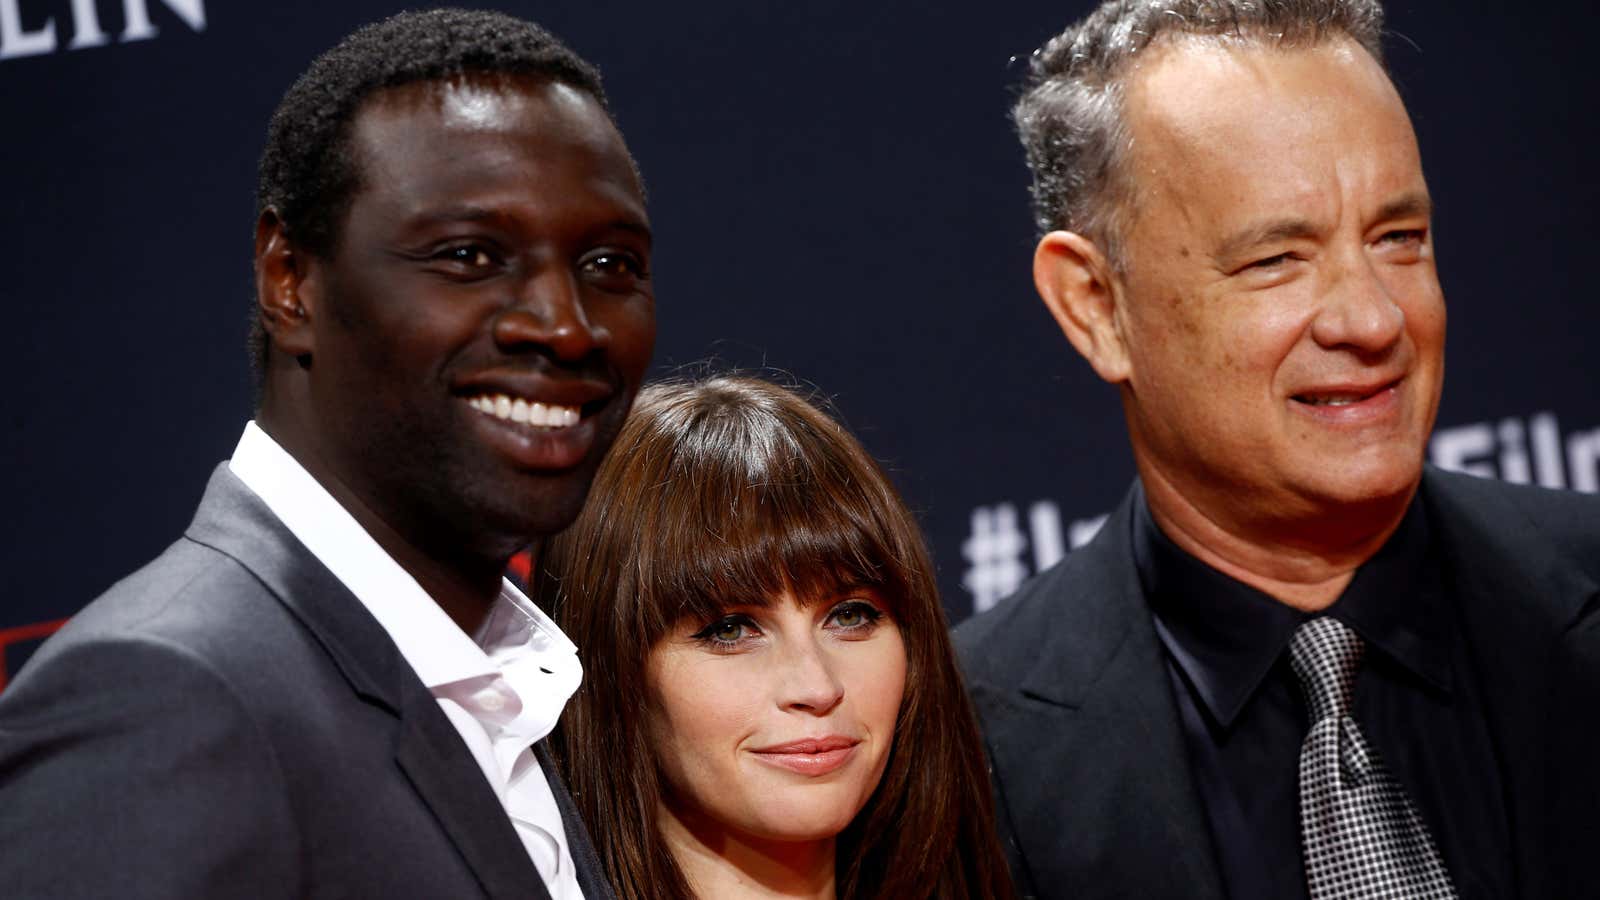 Omar Sy will bring his international gravitas to a French colonial story